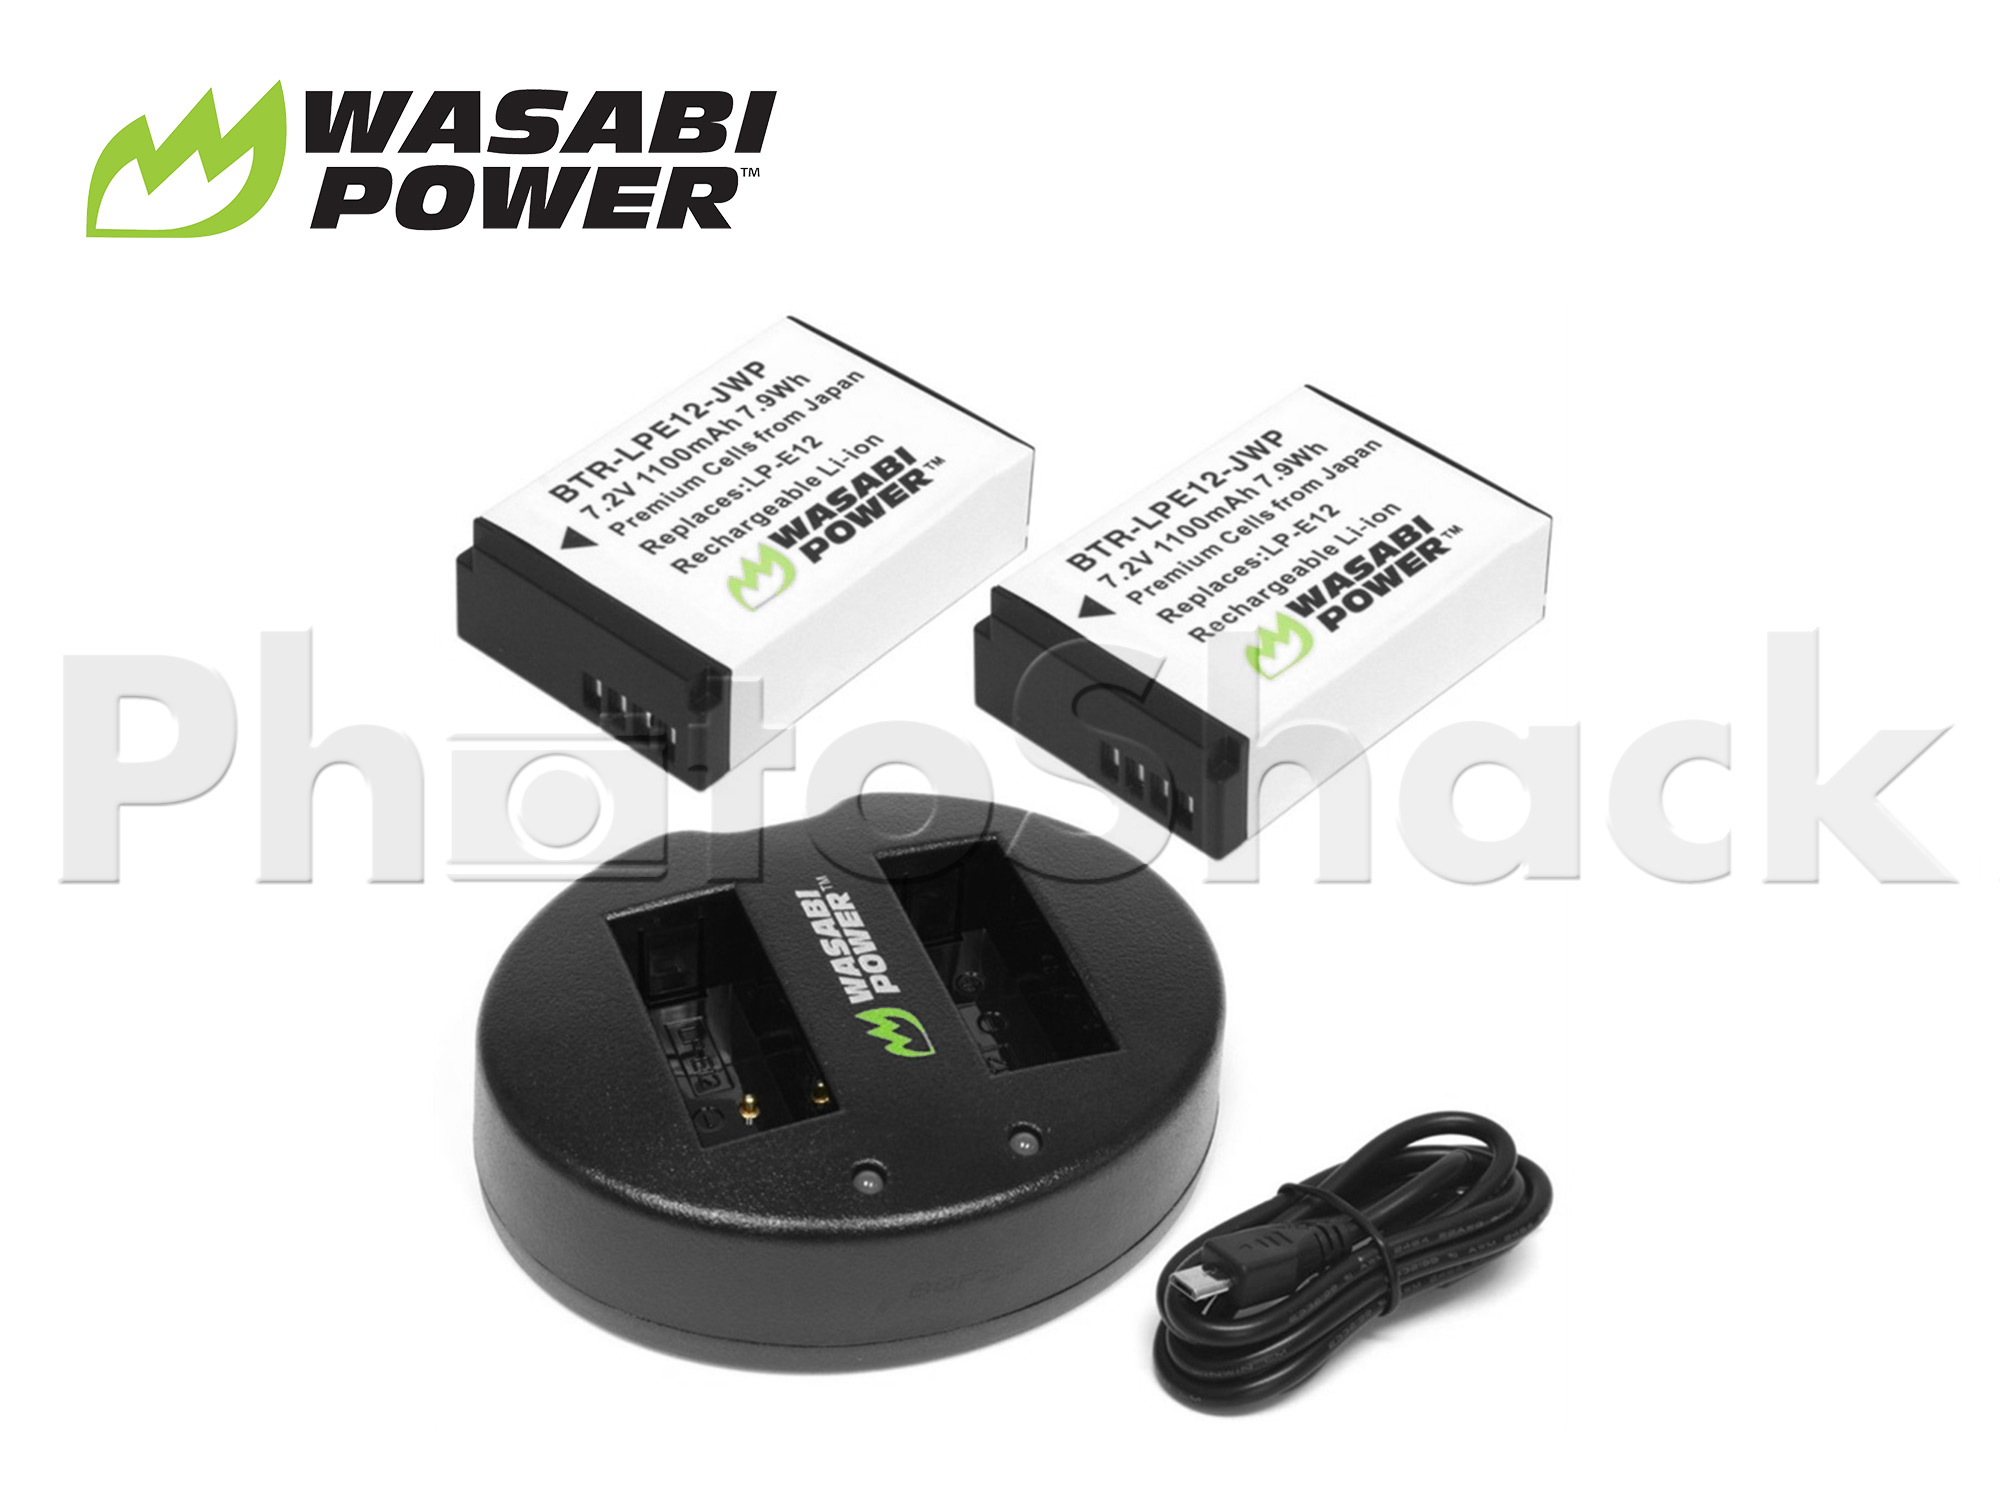 Canon LP-E19, LP-E4, LP-E4N Dual LCD Battery Charger by Wasabi Power